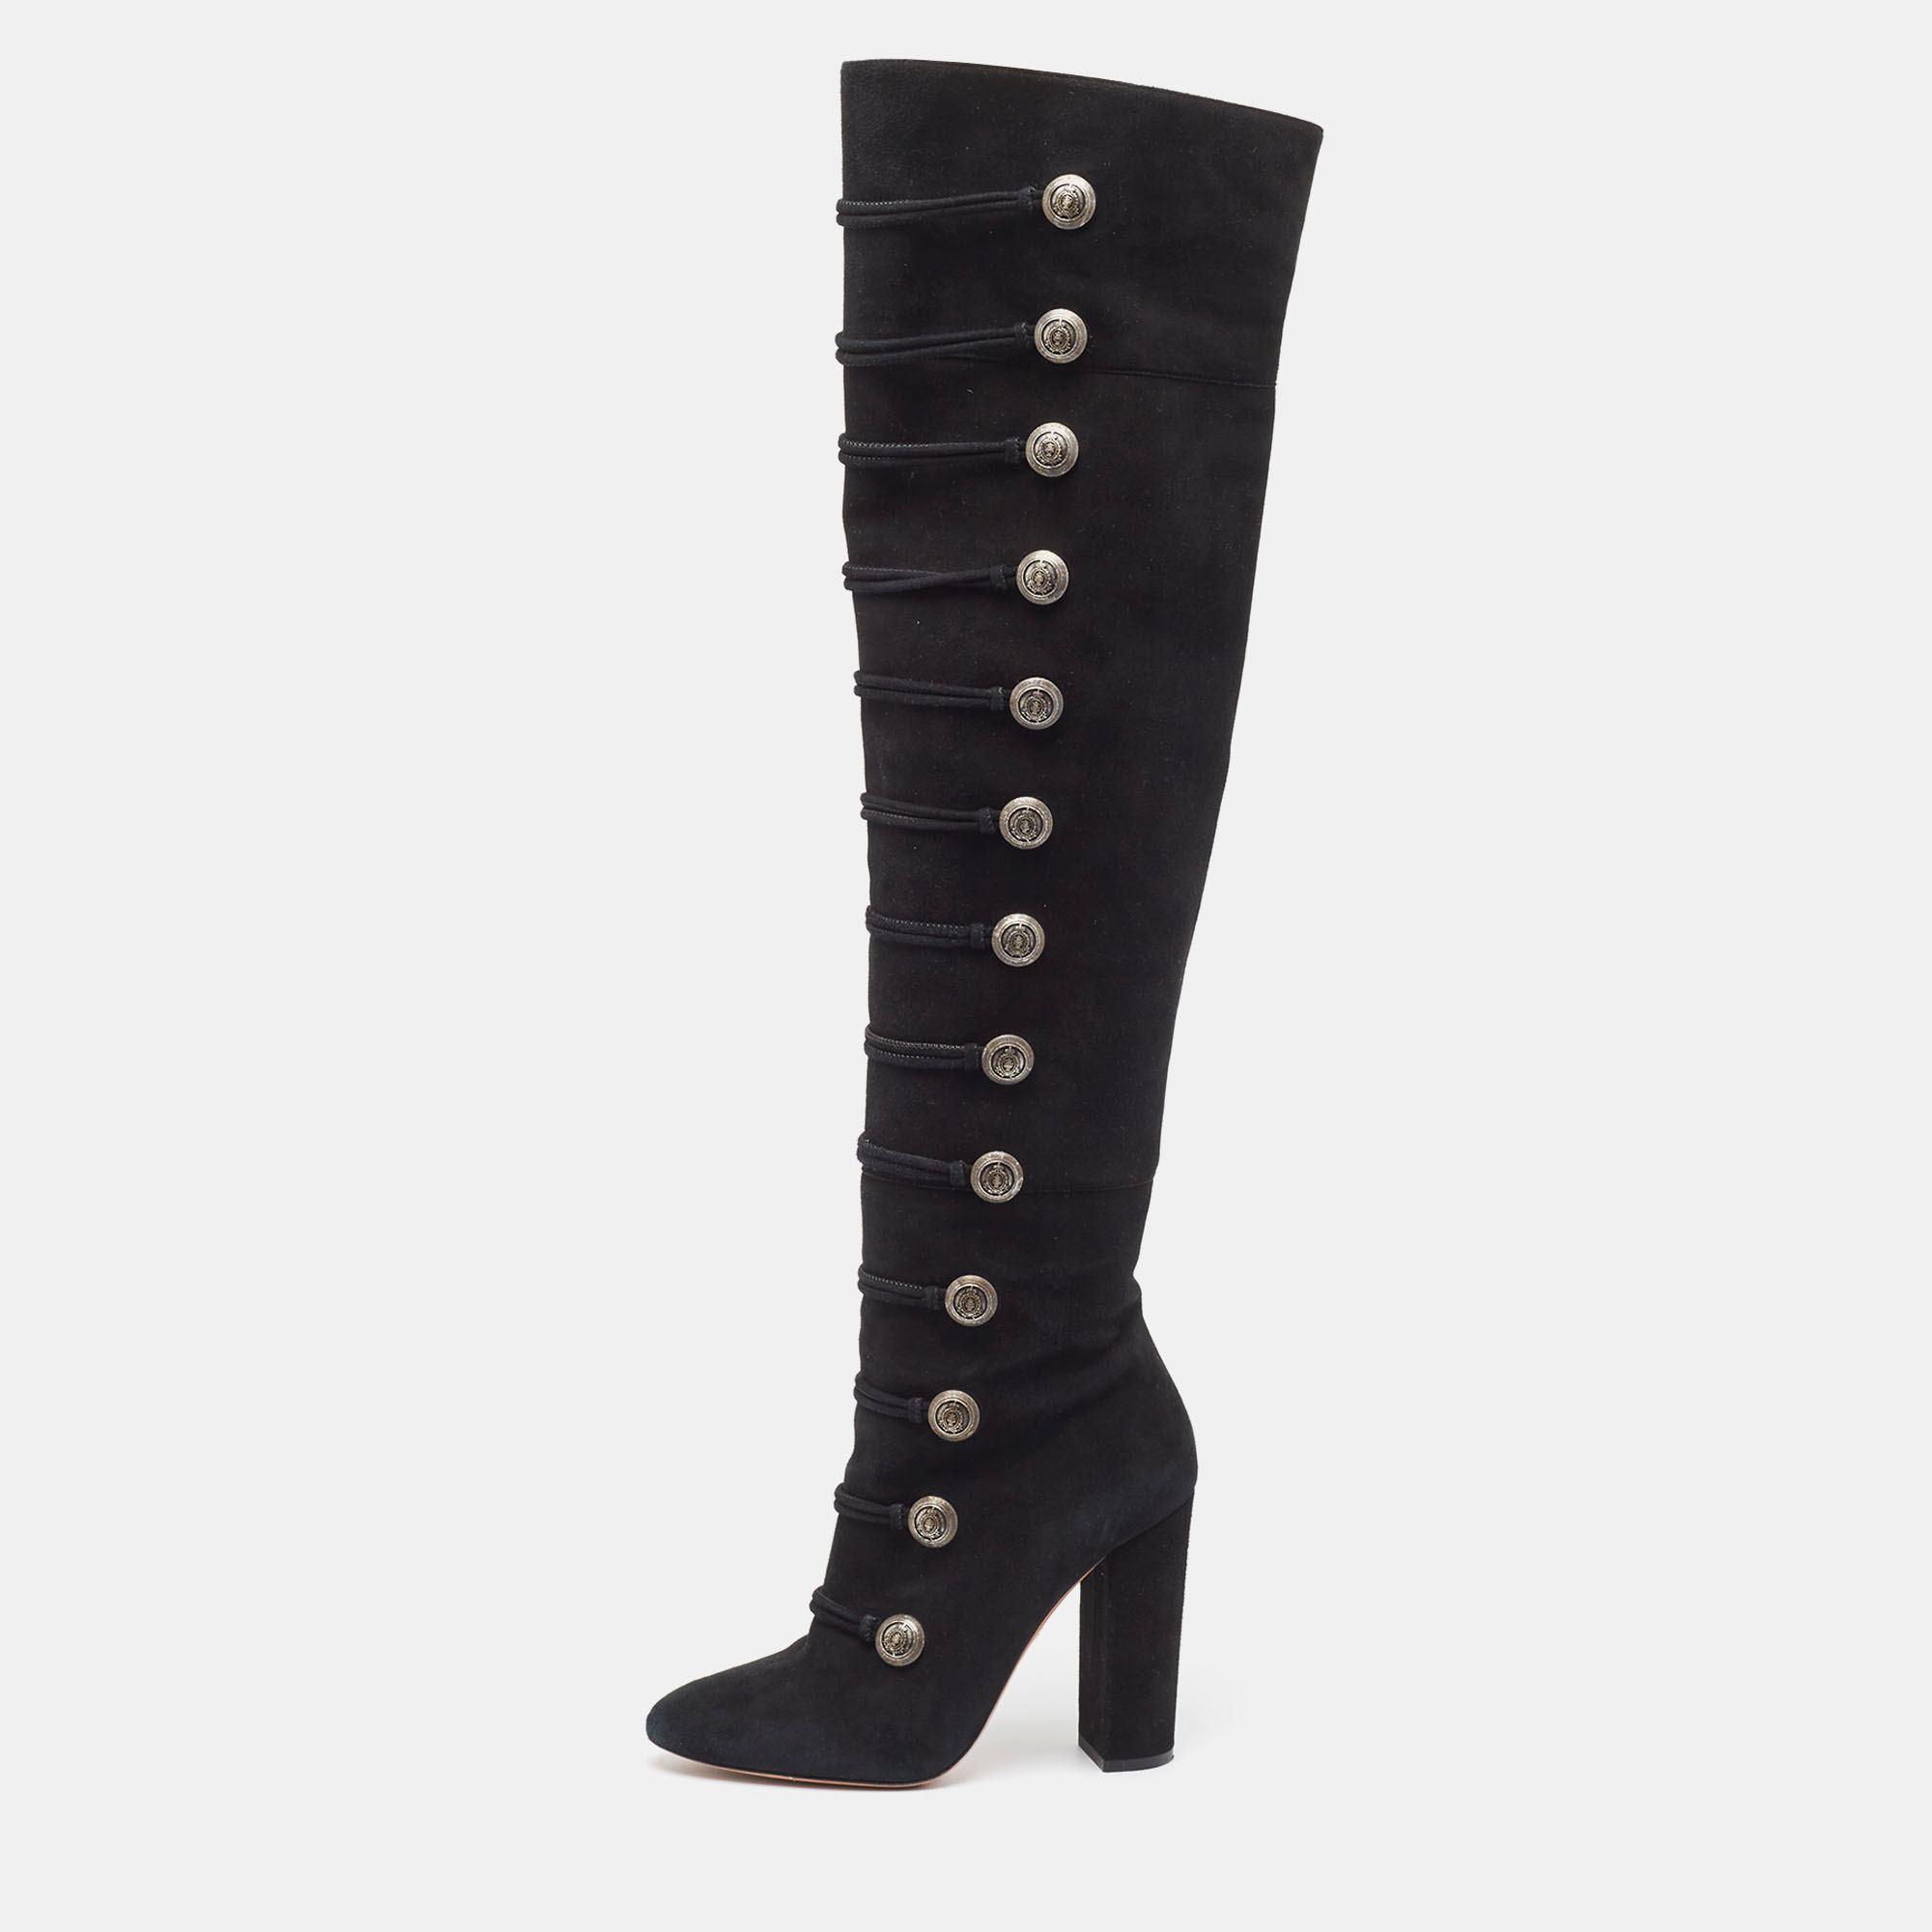 Aquazzura black suede buttons embellished over the knee boots size 39